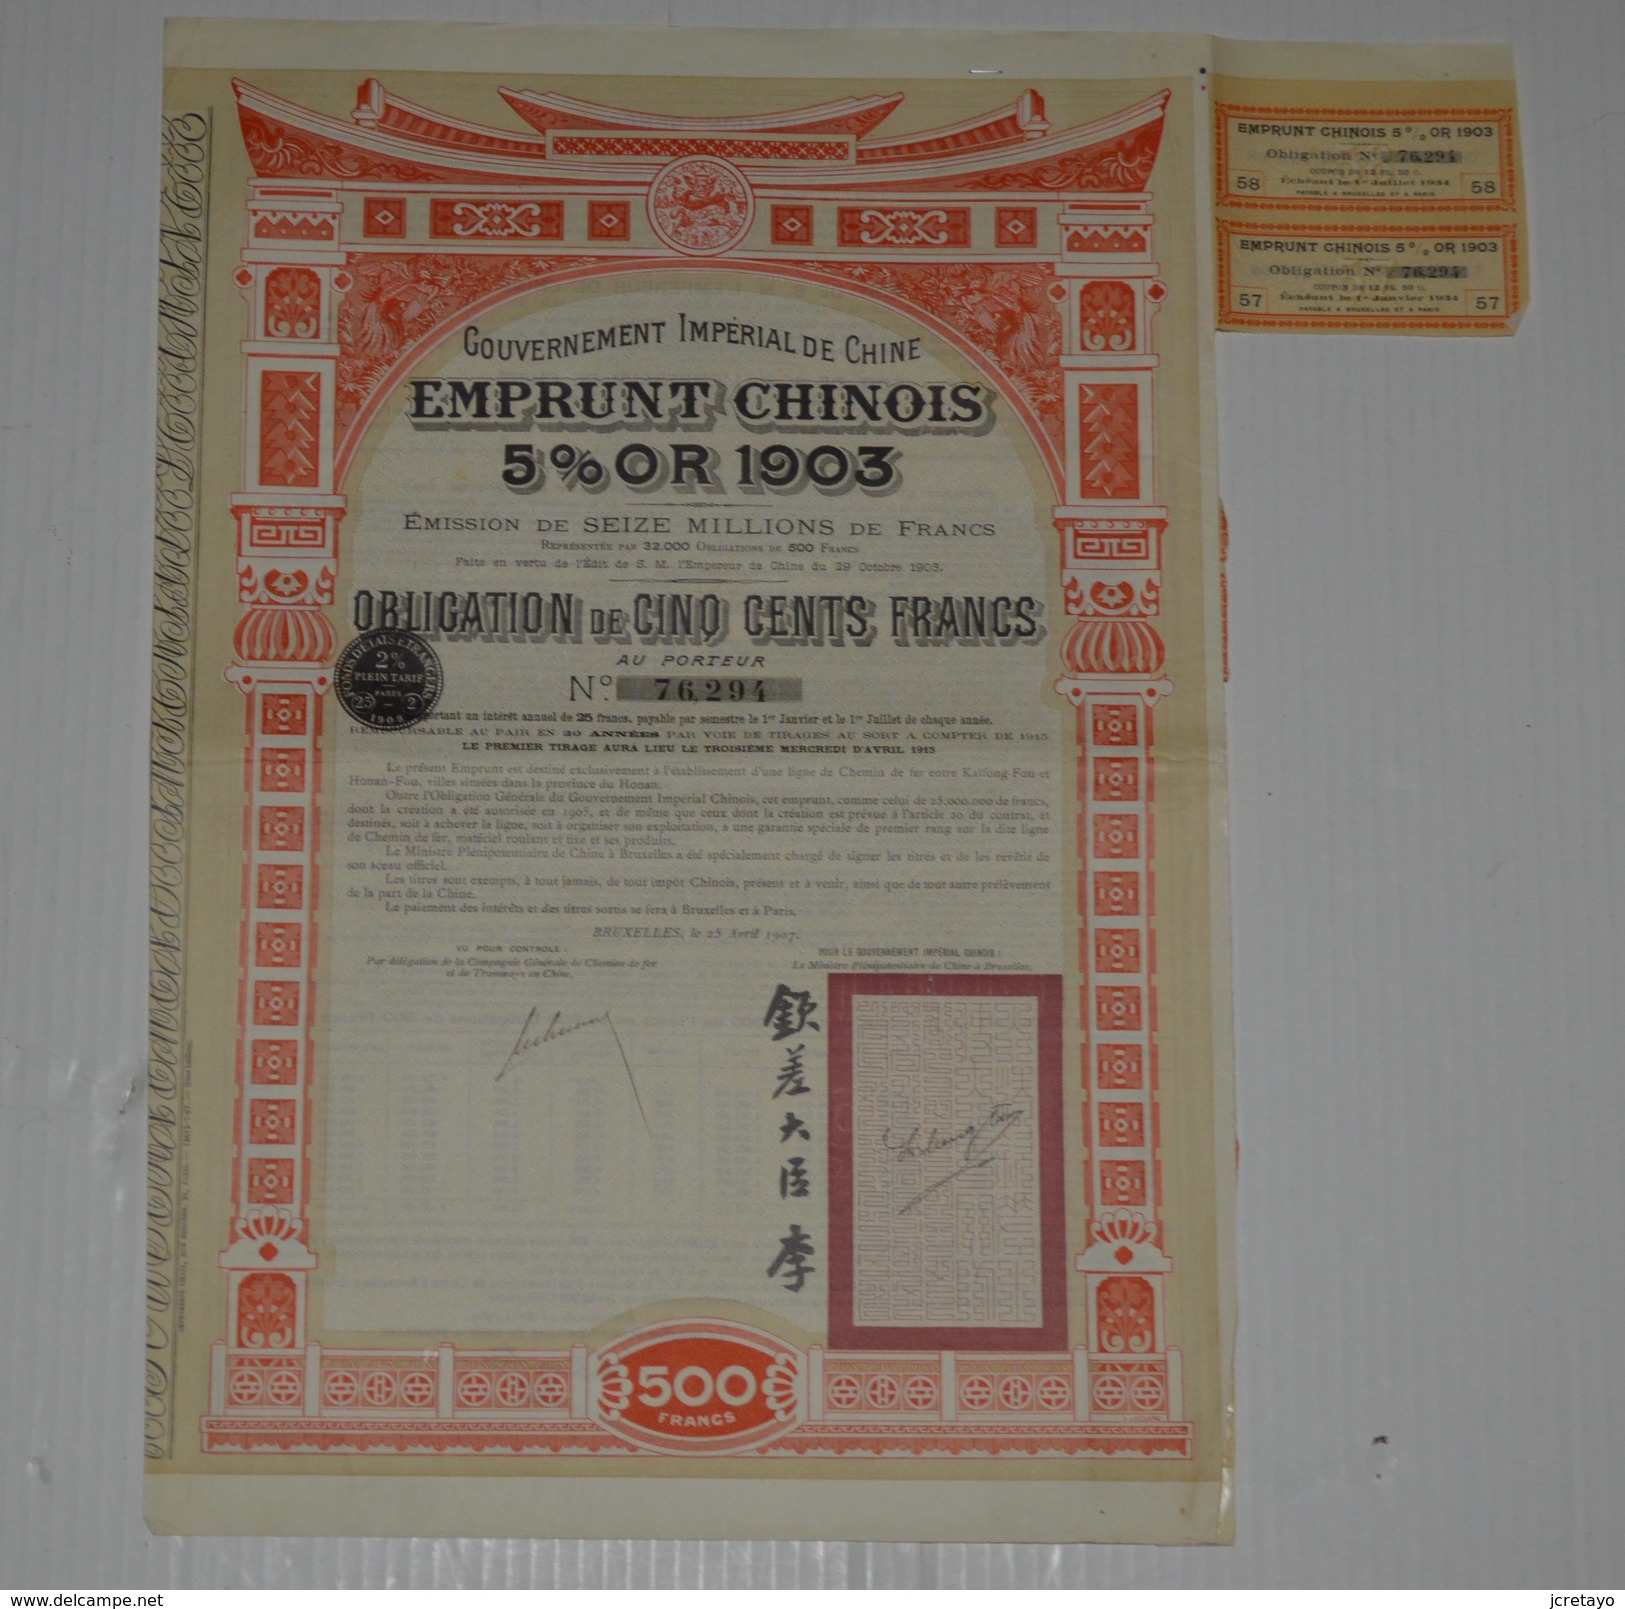 Emprunt Chinois 5% Or 1903 - Banque & Assurance